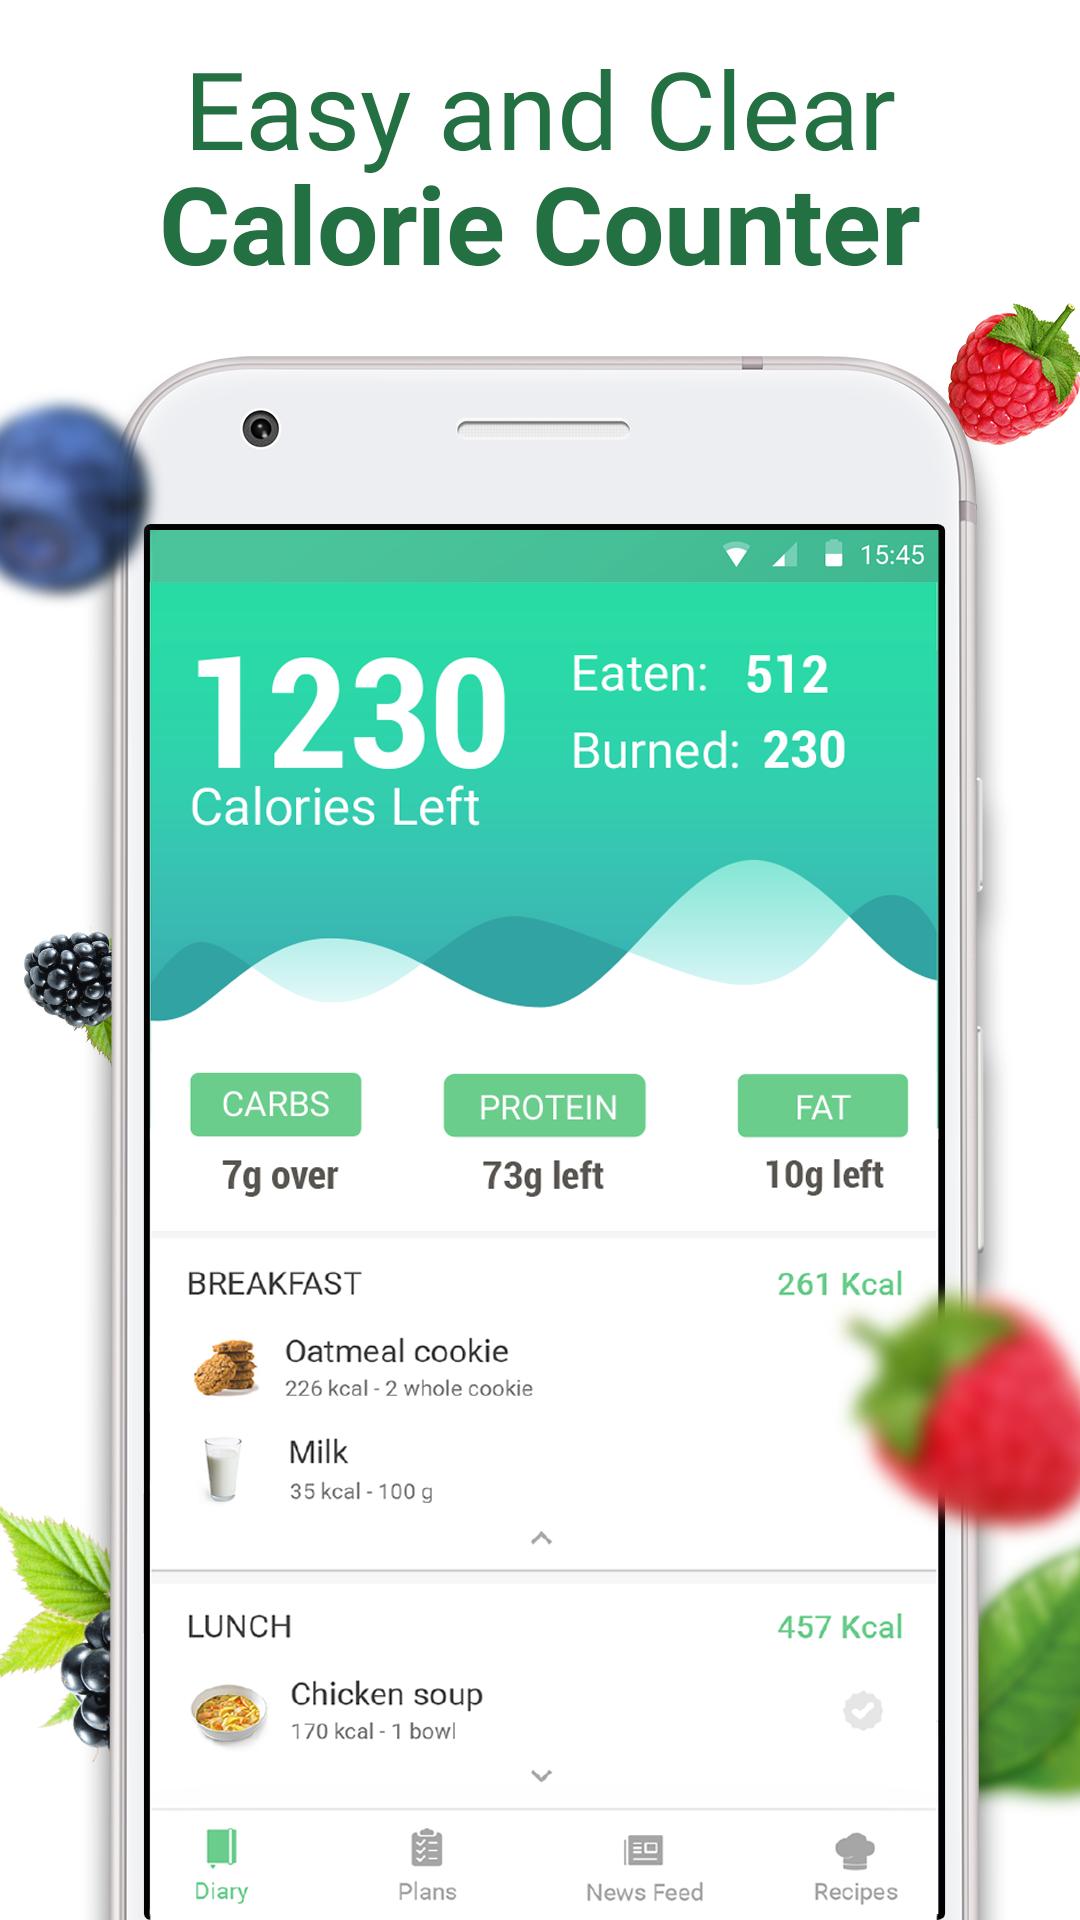 Calorie Counter - Food & Diet Tracker for Android - APK ...